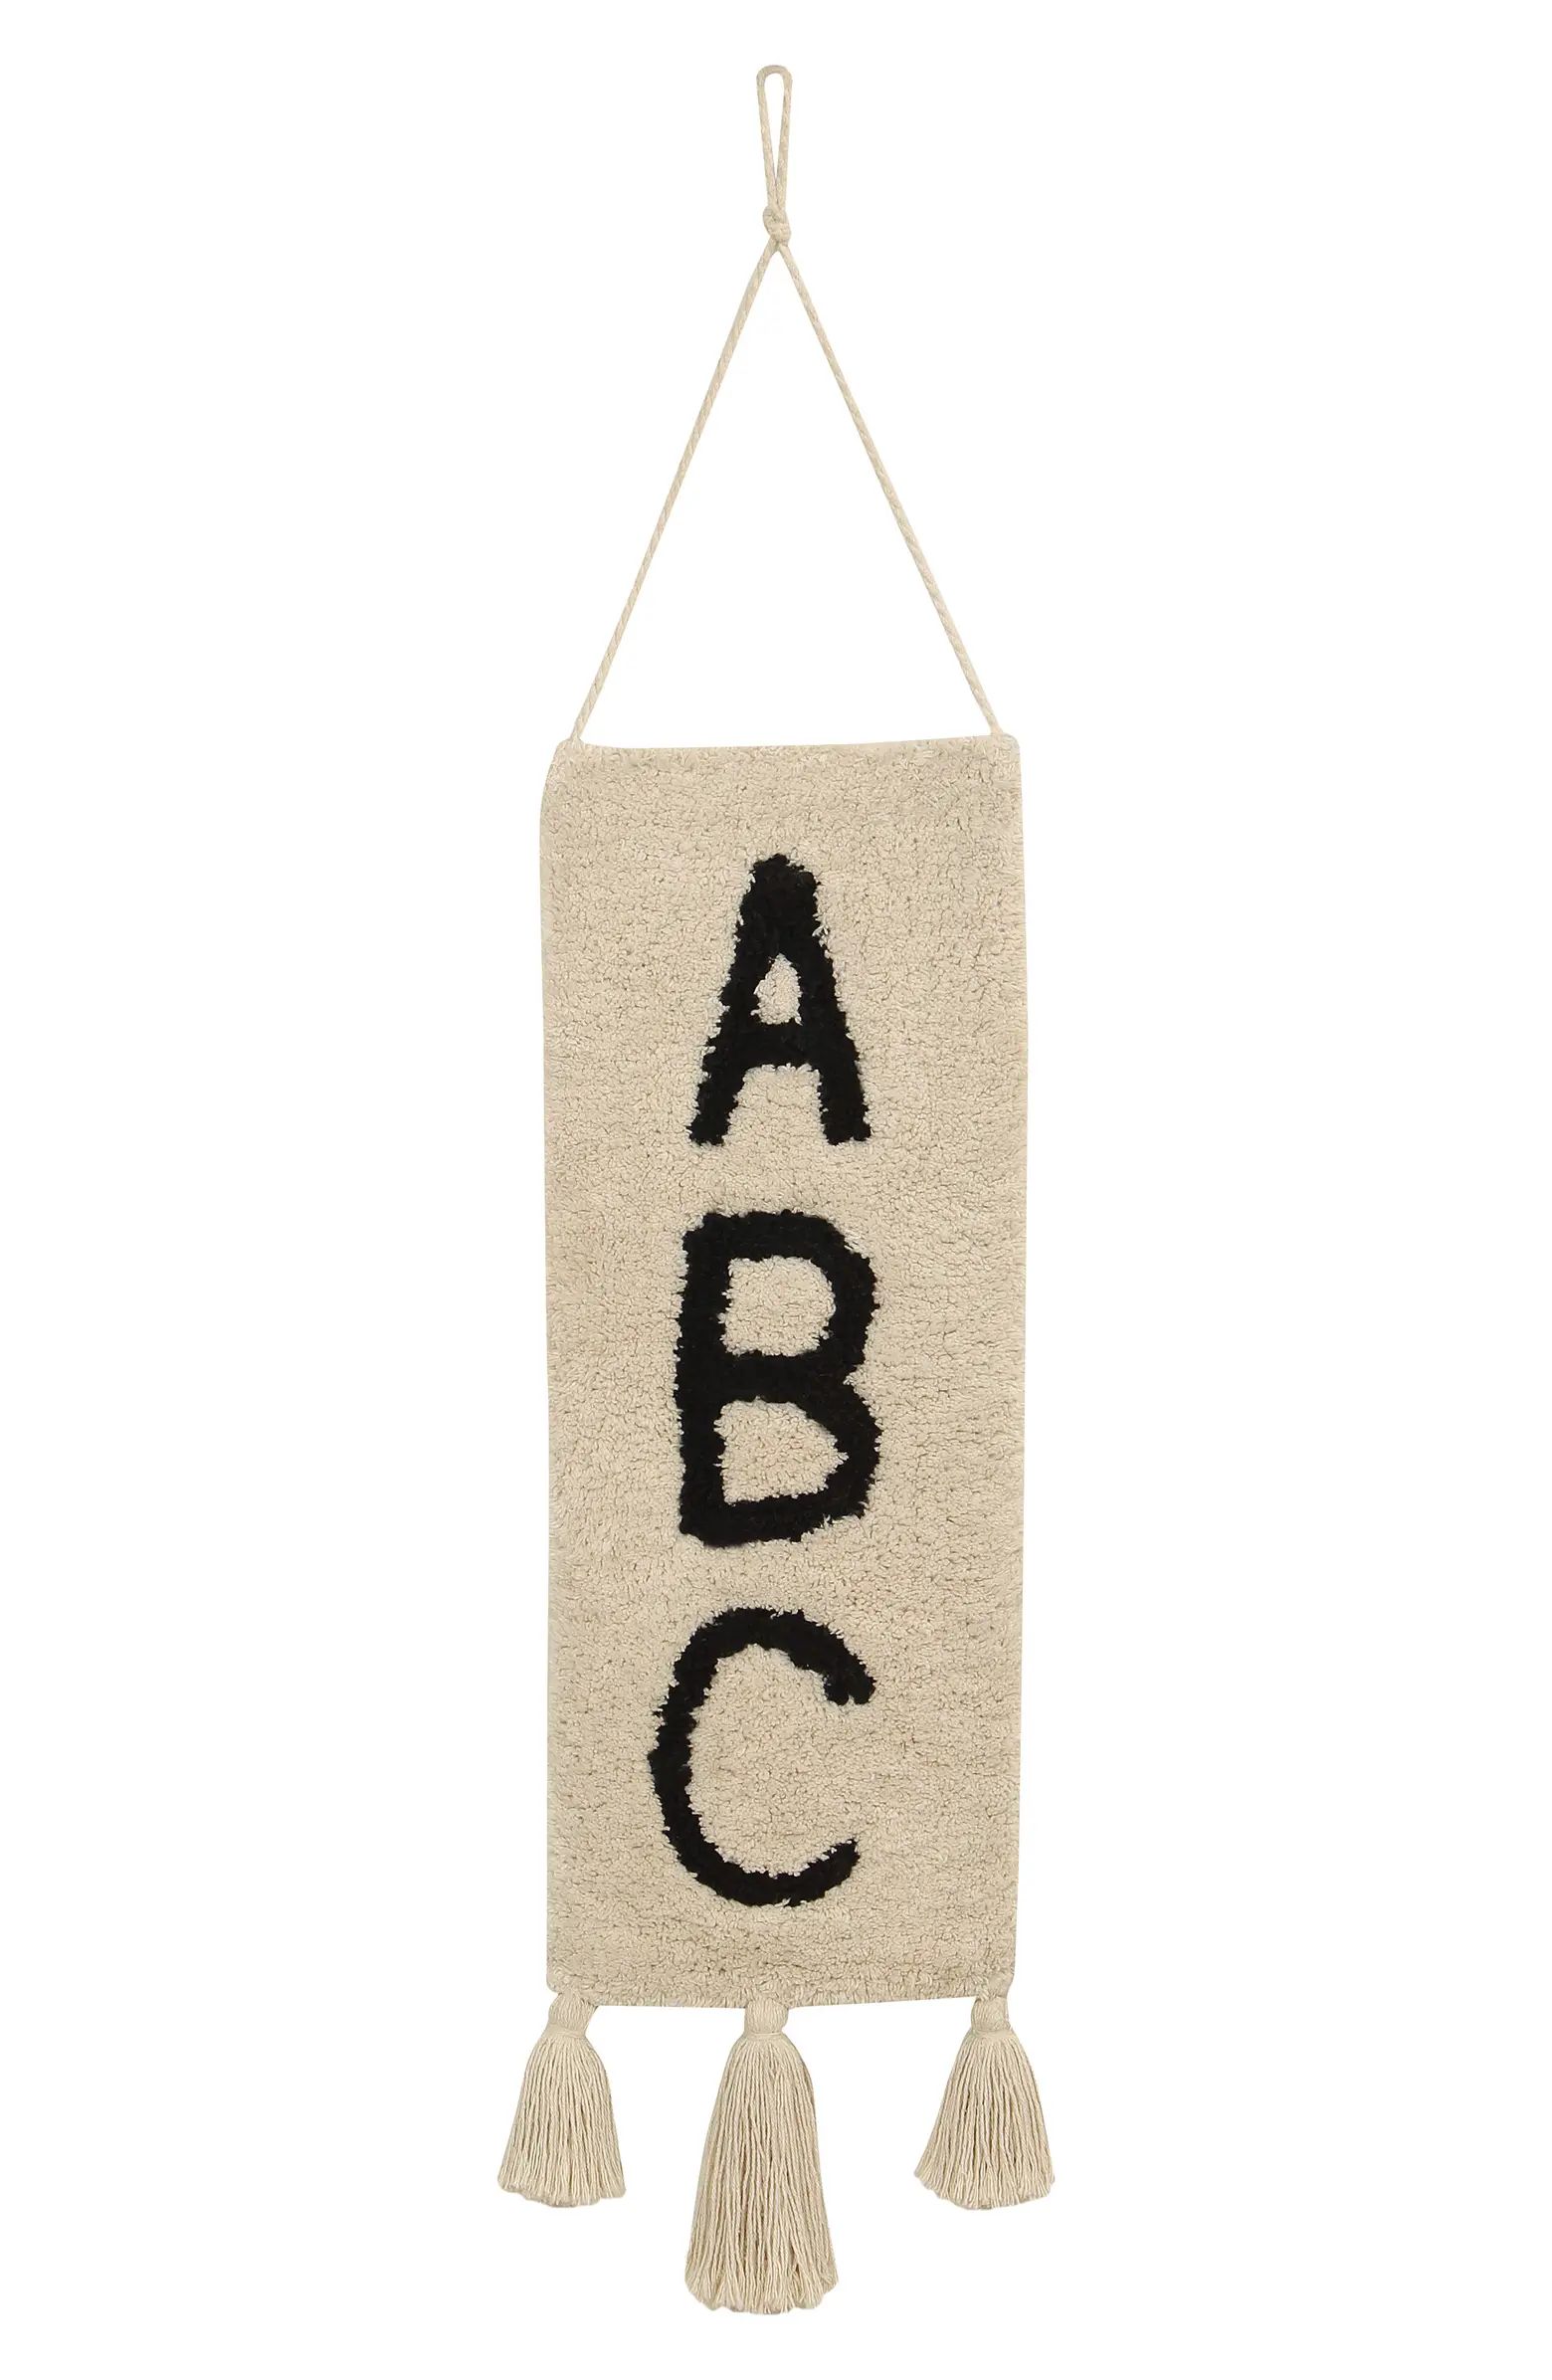 Lorena Canals ABC Wall Hanging | Nordstrom | Nordstrom